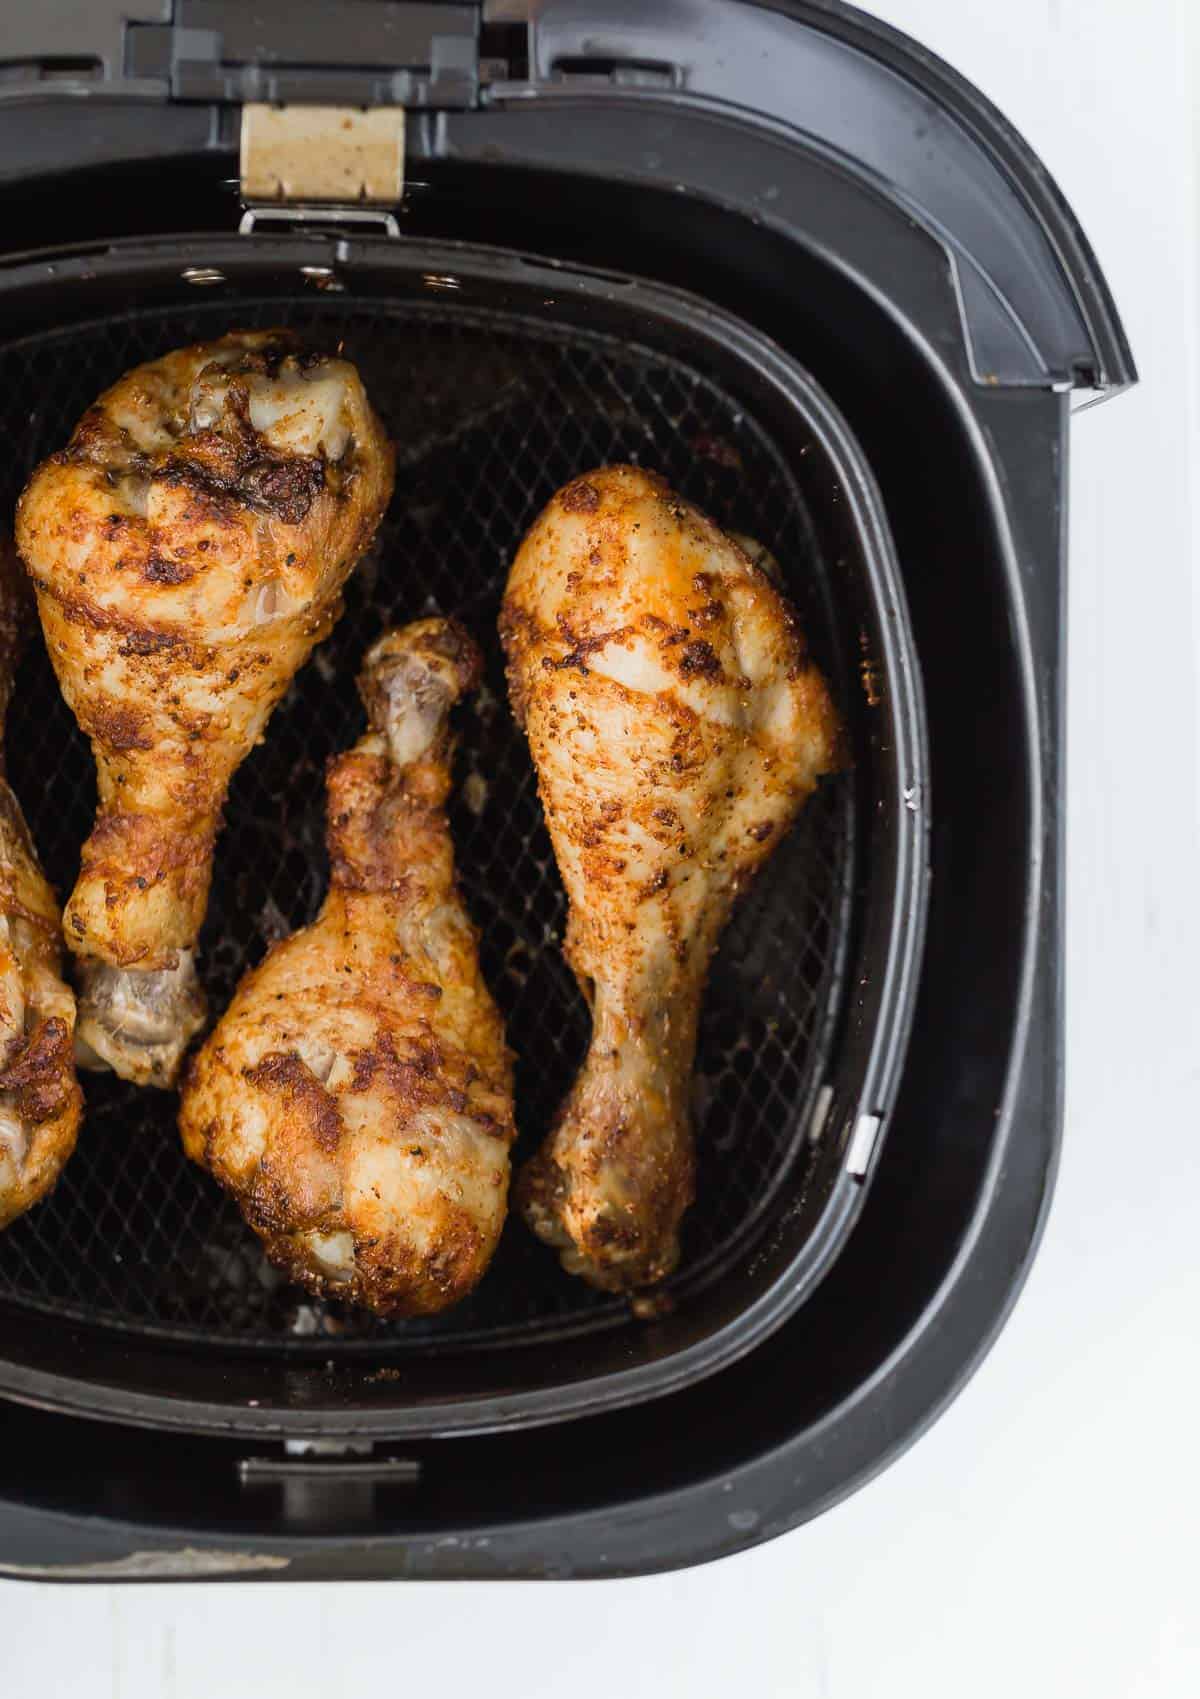 Overhead view of a black air fryer basket with cooked chicken drumsticks inside it.